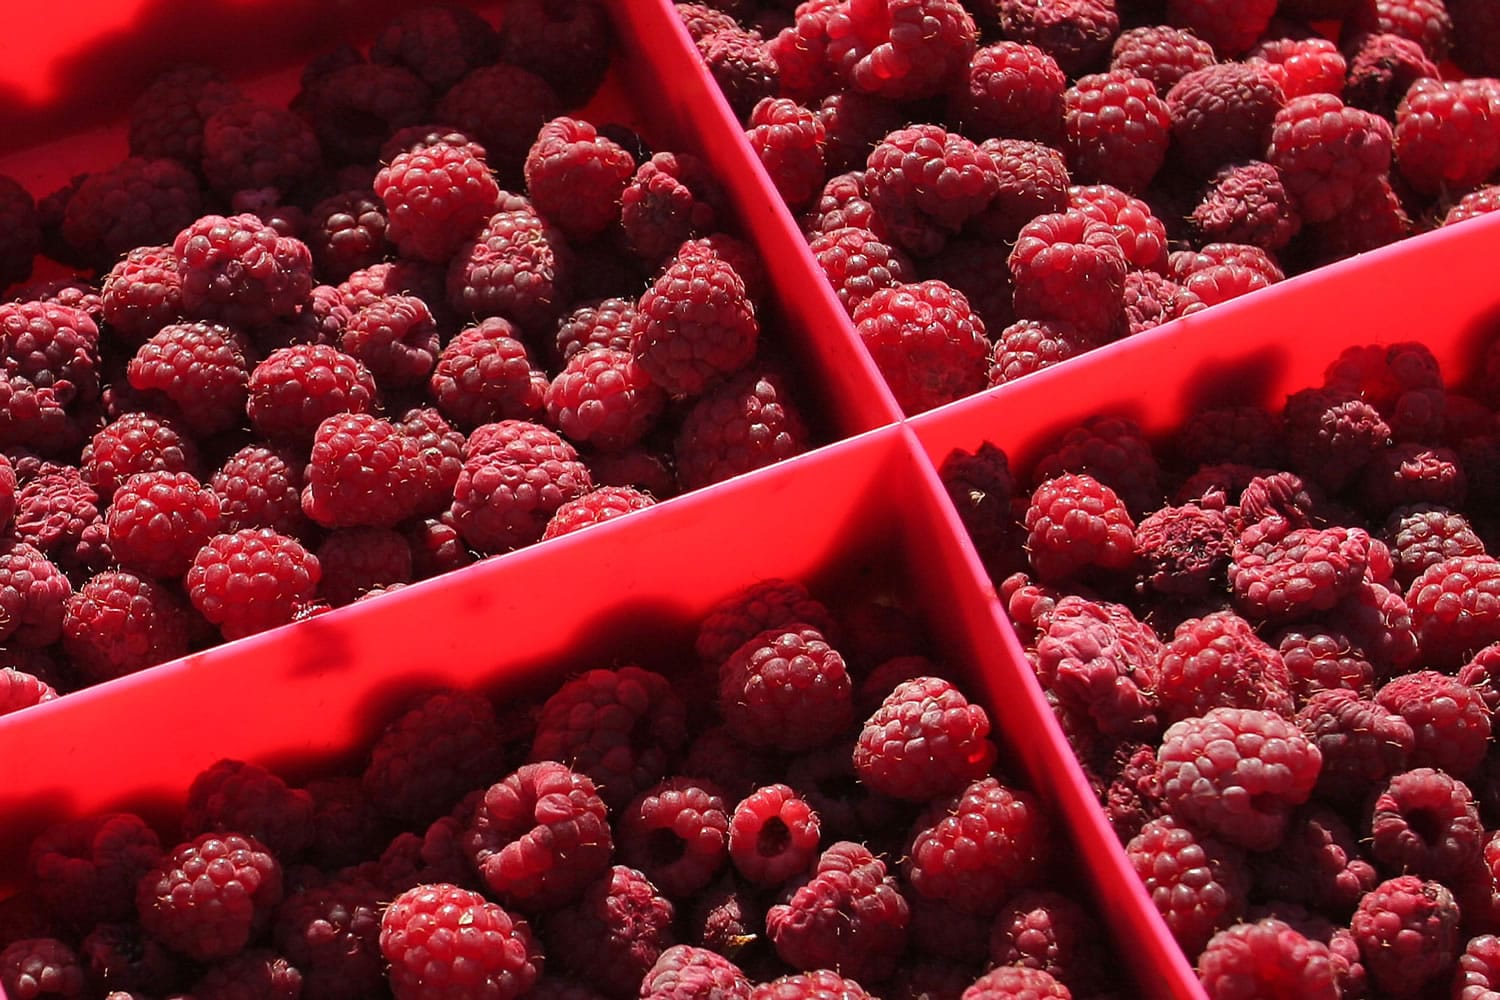 Fresh red raspberries have a sweet-tart flavor and are delicious eaten alone or combined with other berries.